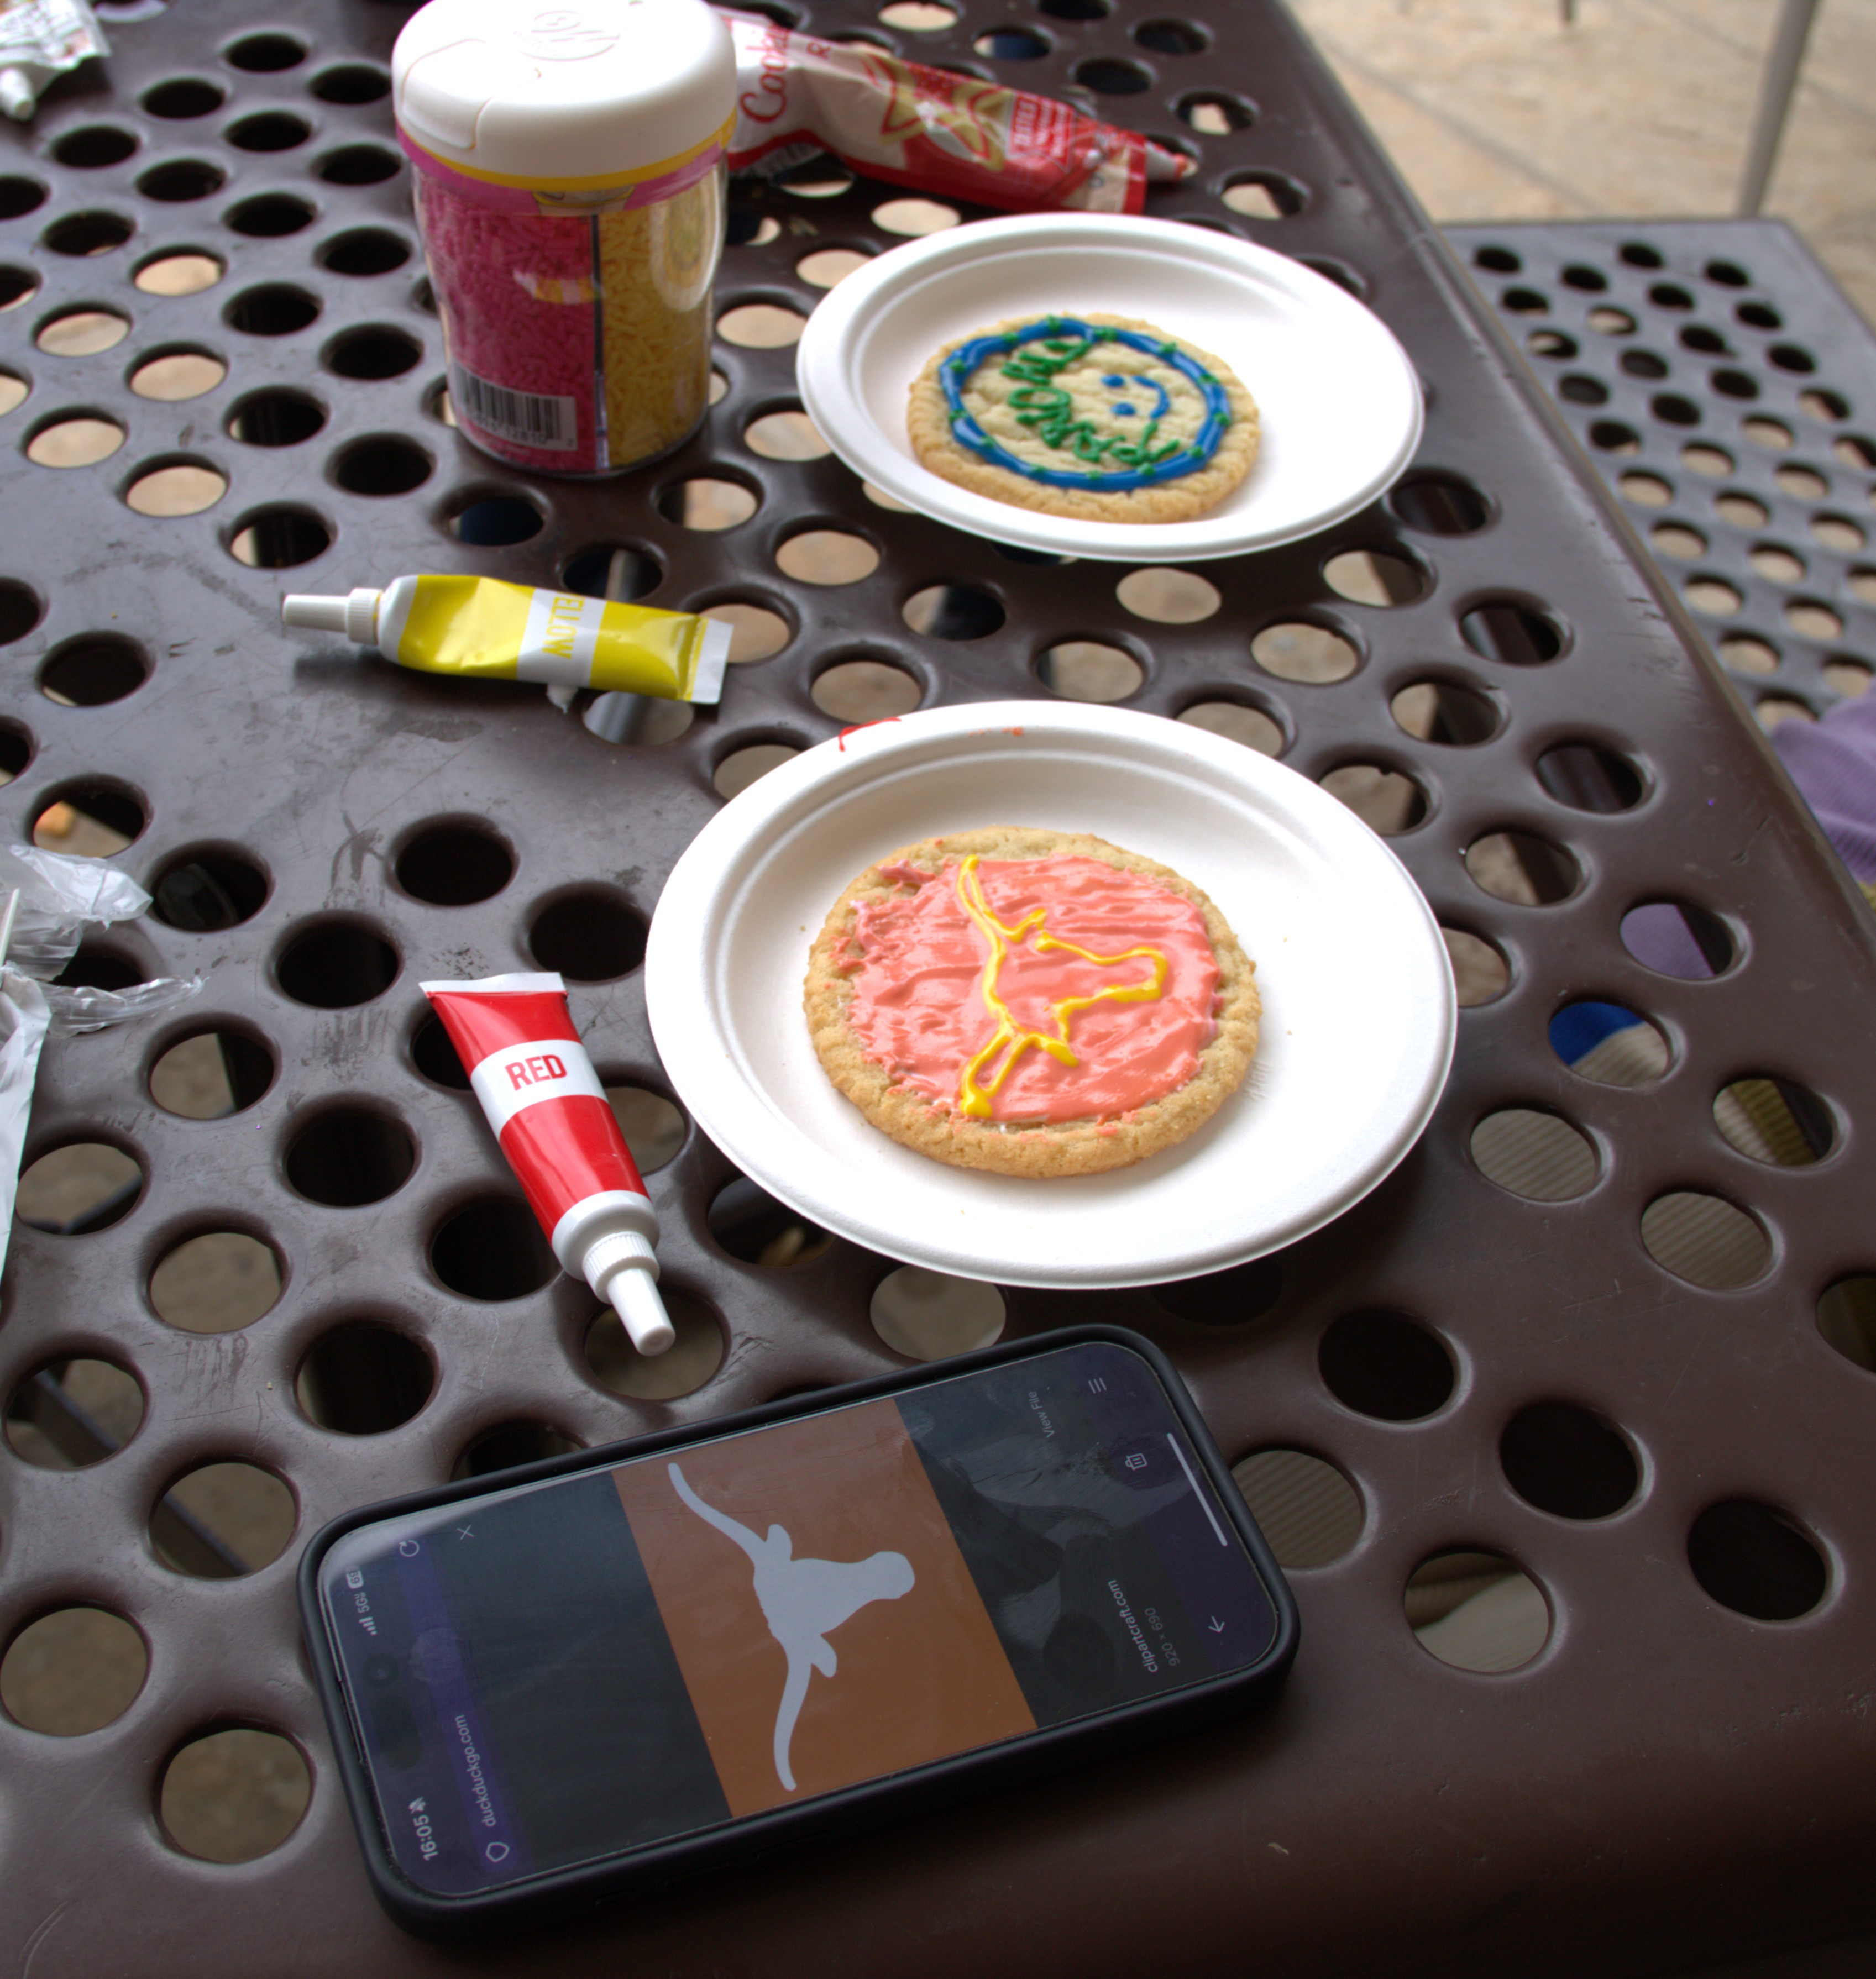 Other cookie decorating centered around college mascots